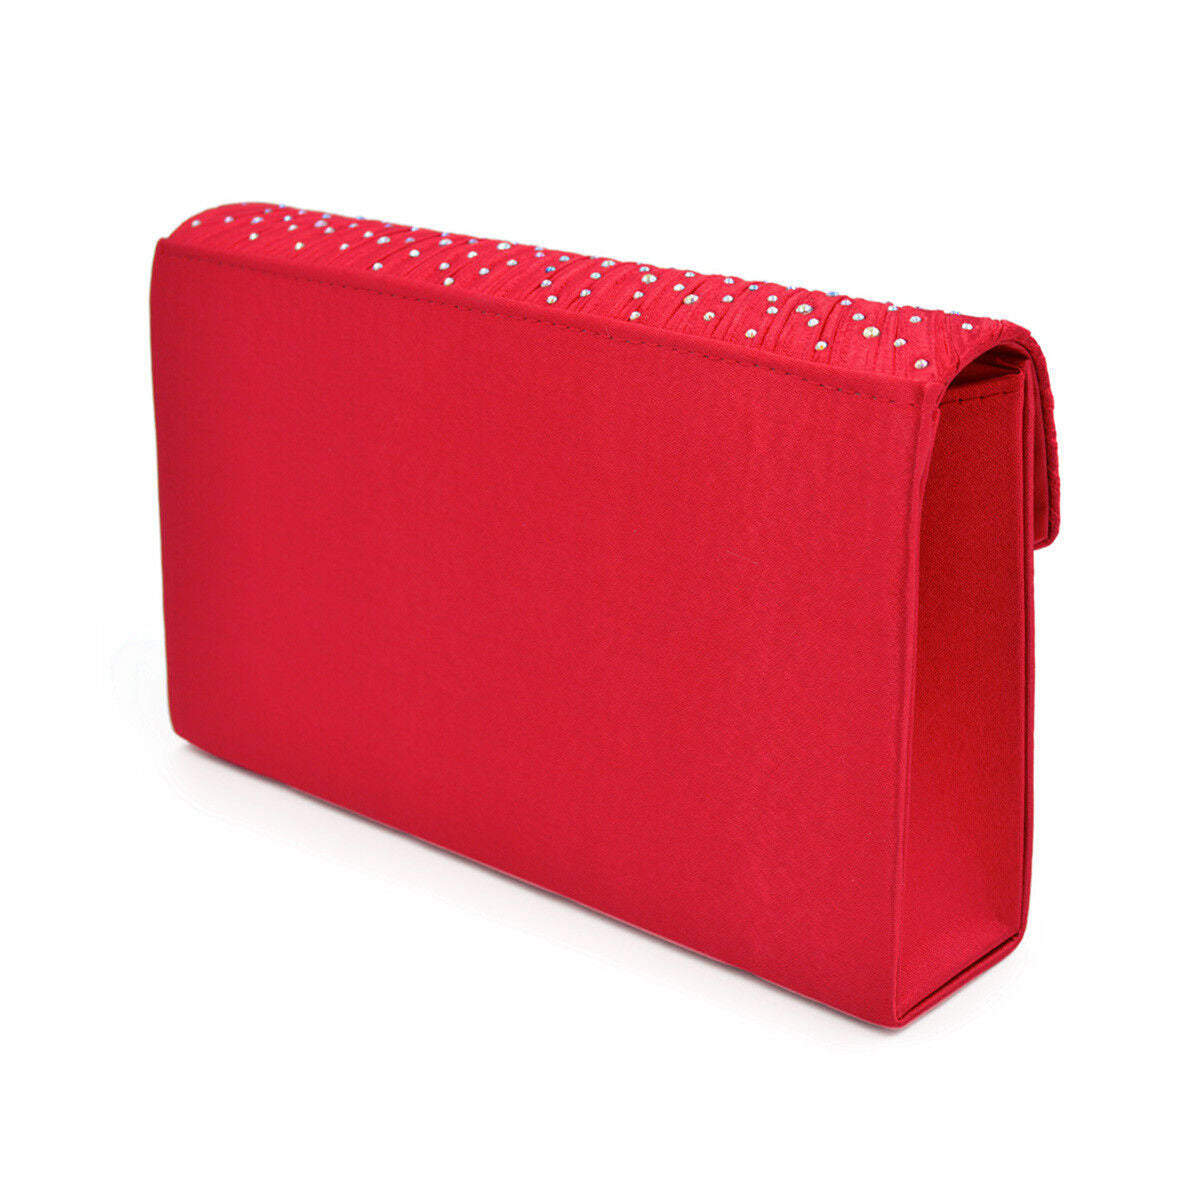 Clutch Red Ruched Rhinestone Bag for Women